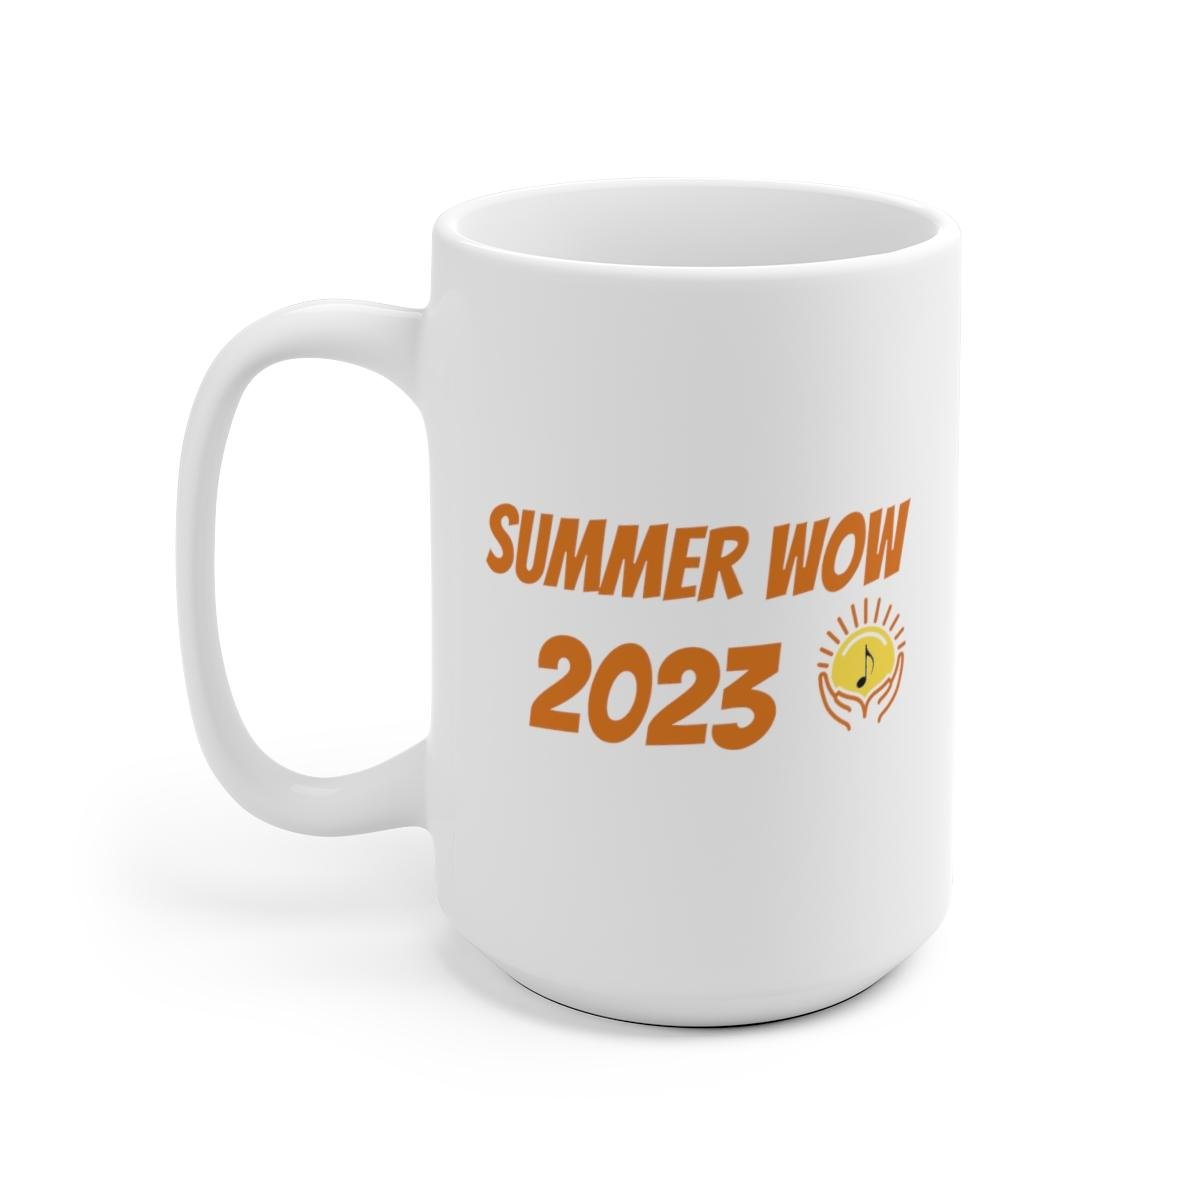 Worship On The Waterfront - Summer WOW 2023 White Mugs (2 Sizes)